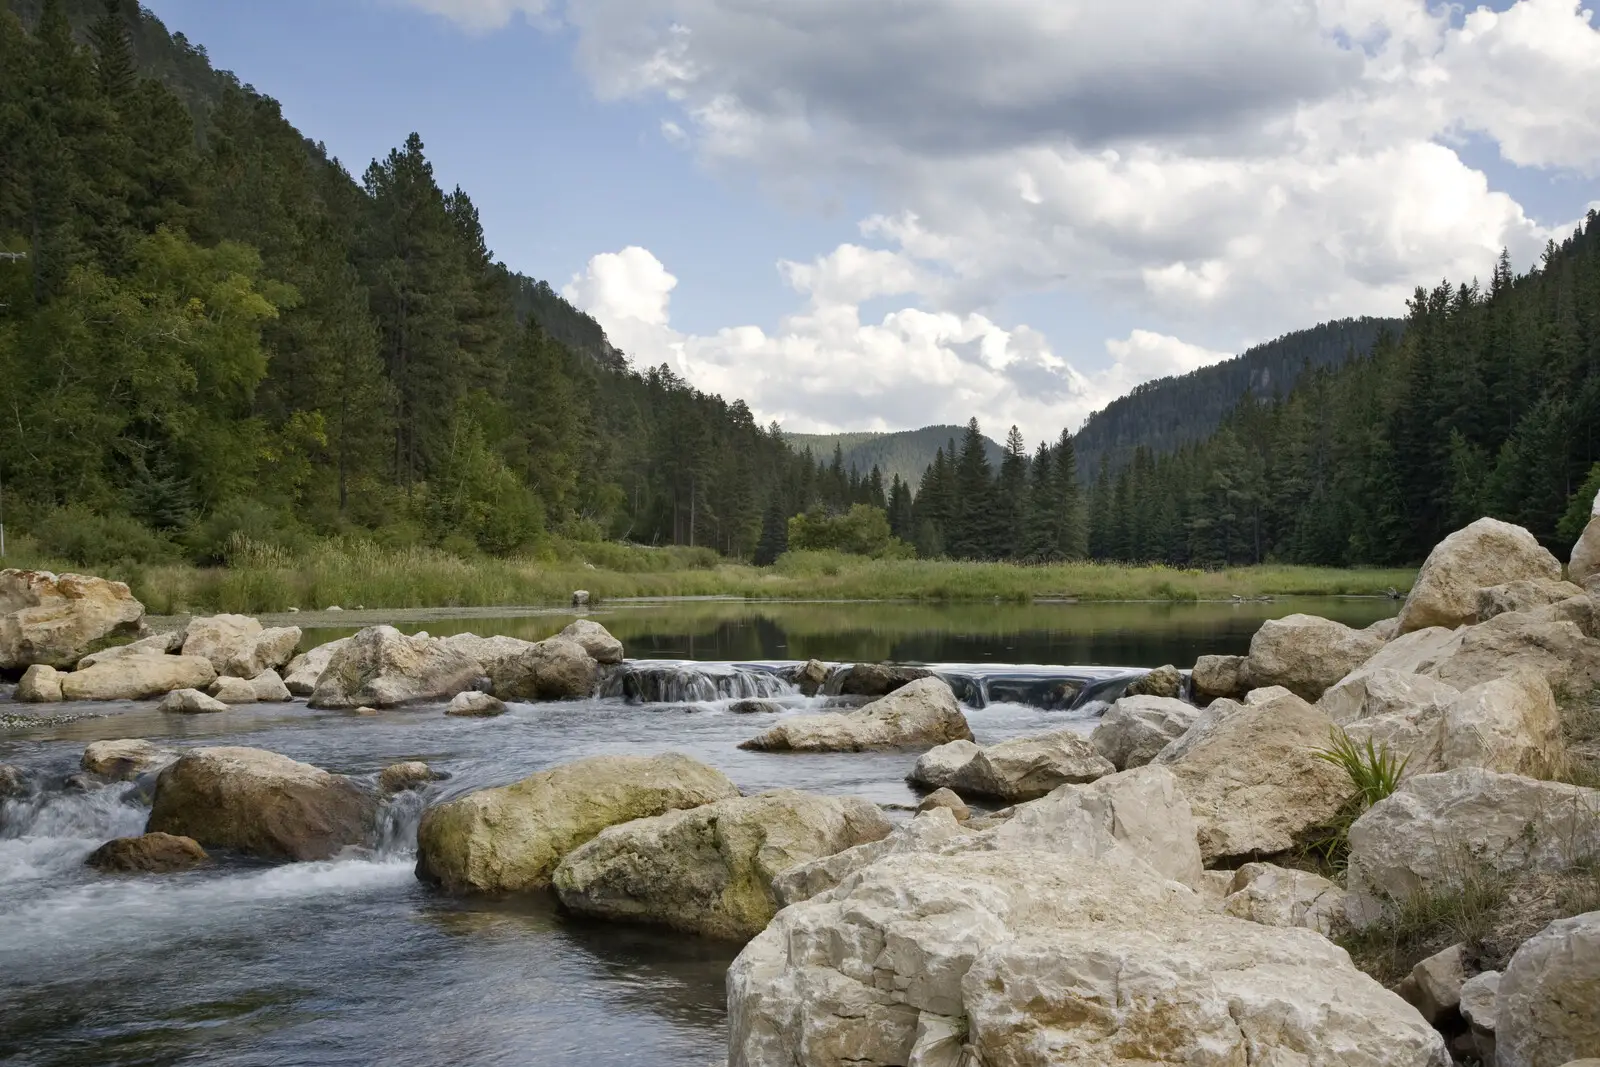 Trout stream and pond in spearfish canyon with green pines and rocks scattered along the edges and in the stream